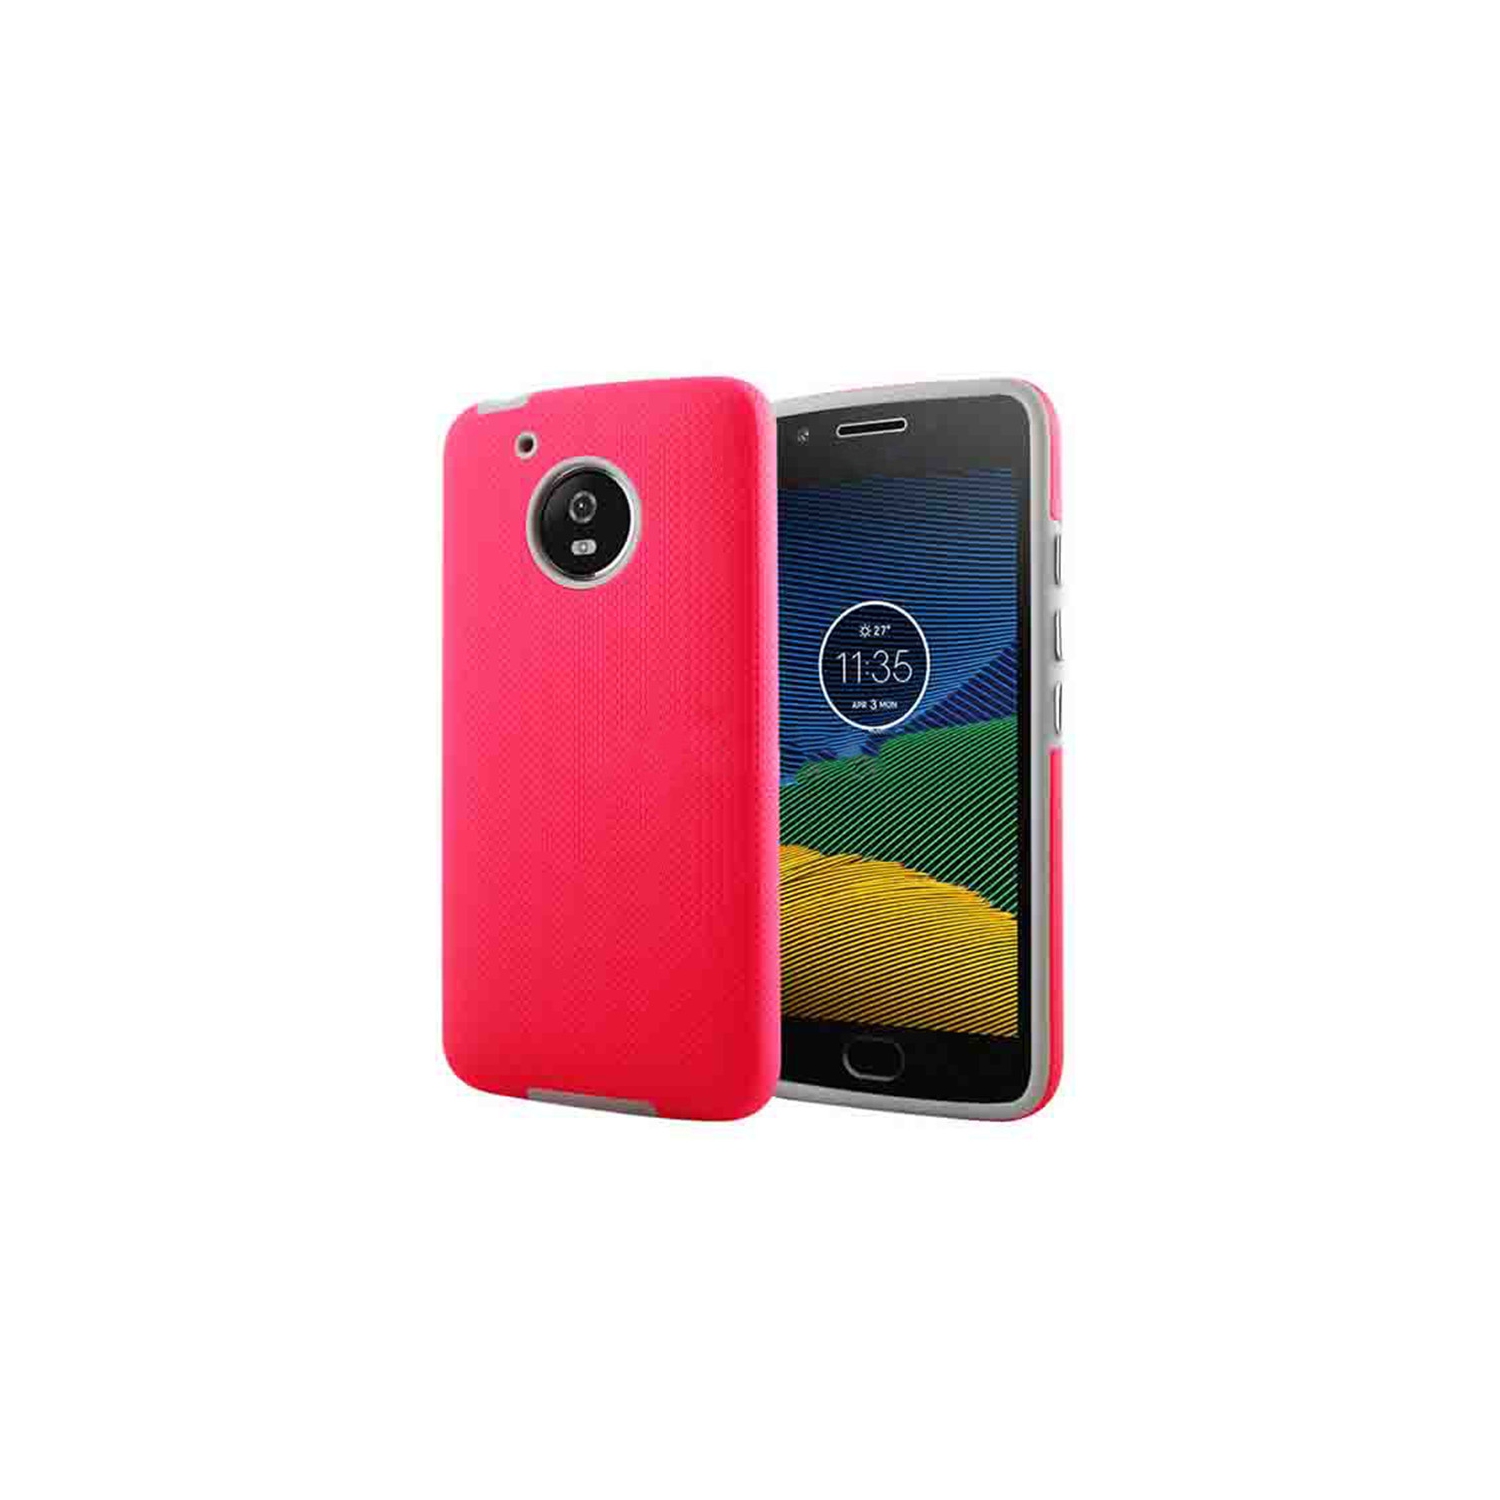 【CSmart】 Slim Fitted Hybrid Hard PC Shell Shockproof Scratch Resistant Case Cover for Motorola Moto Z3 Play, Hot Pink